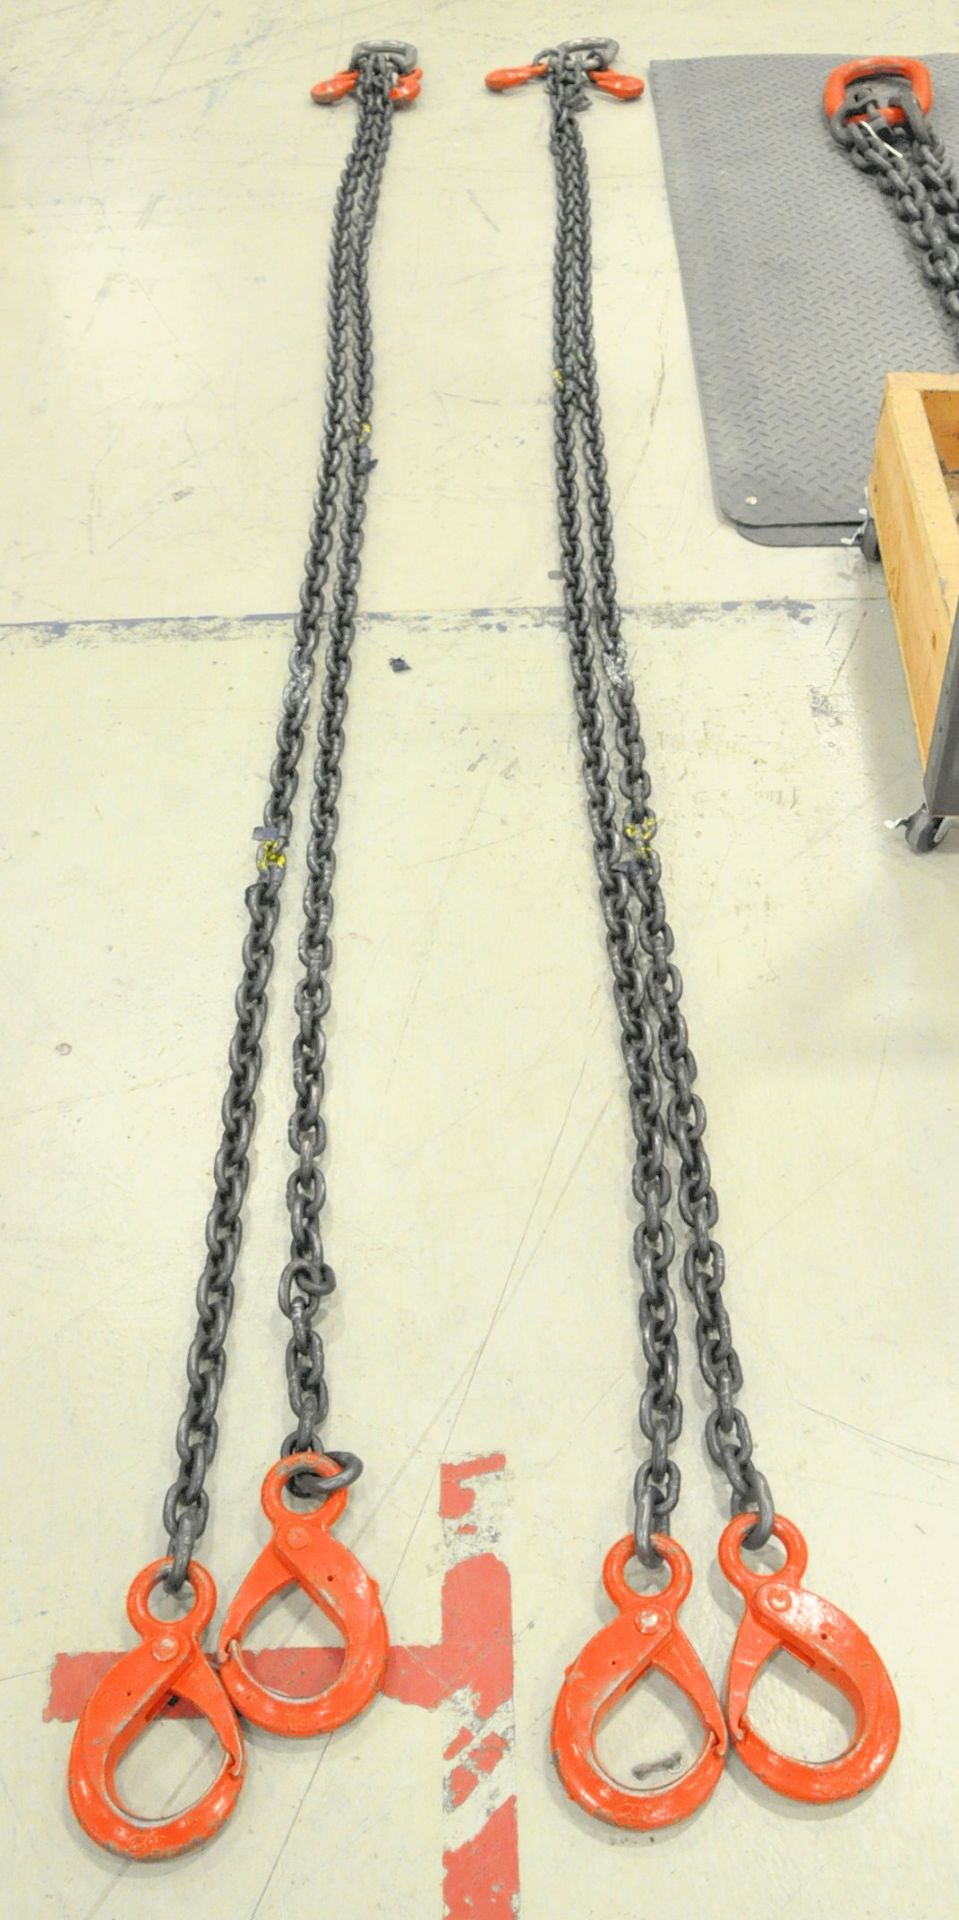 Lot-(2) 3/8" Link x 10' Long 2-Hook Chain Slings with Chokers and Cert Tags, with (1) 5/8" Link x 3' - Image 3 of 12